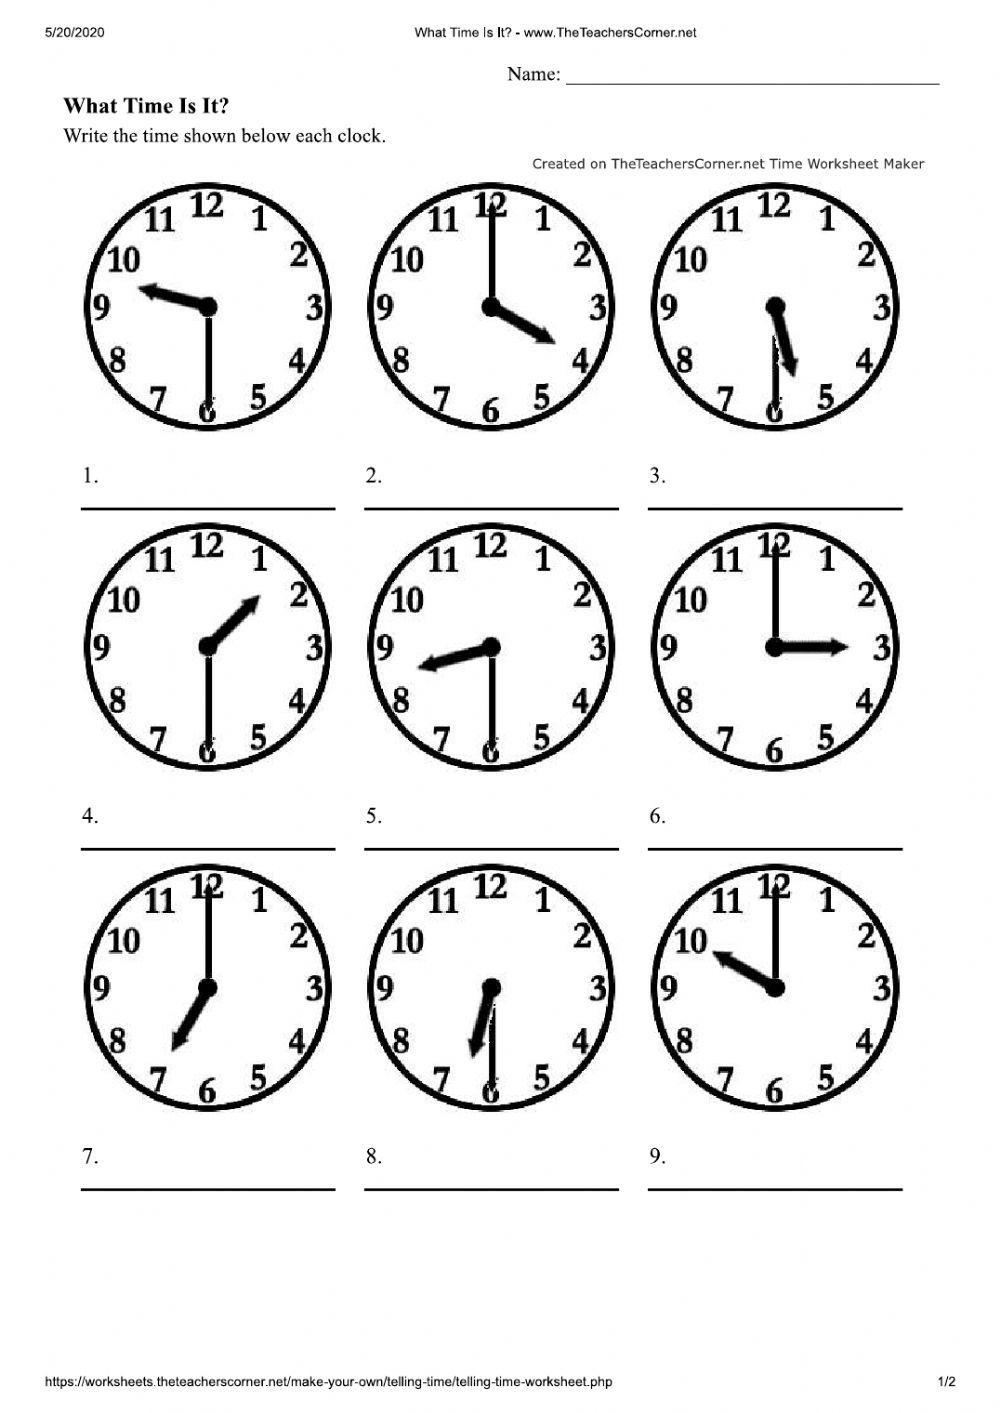 What Time Is It - Half Hours